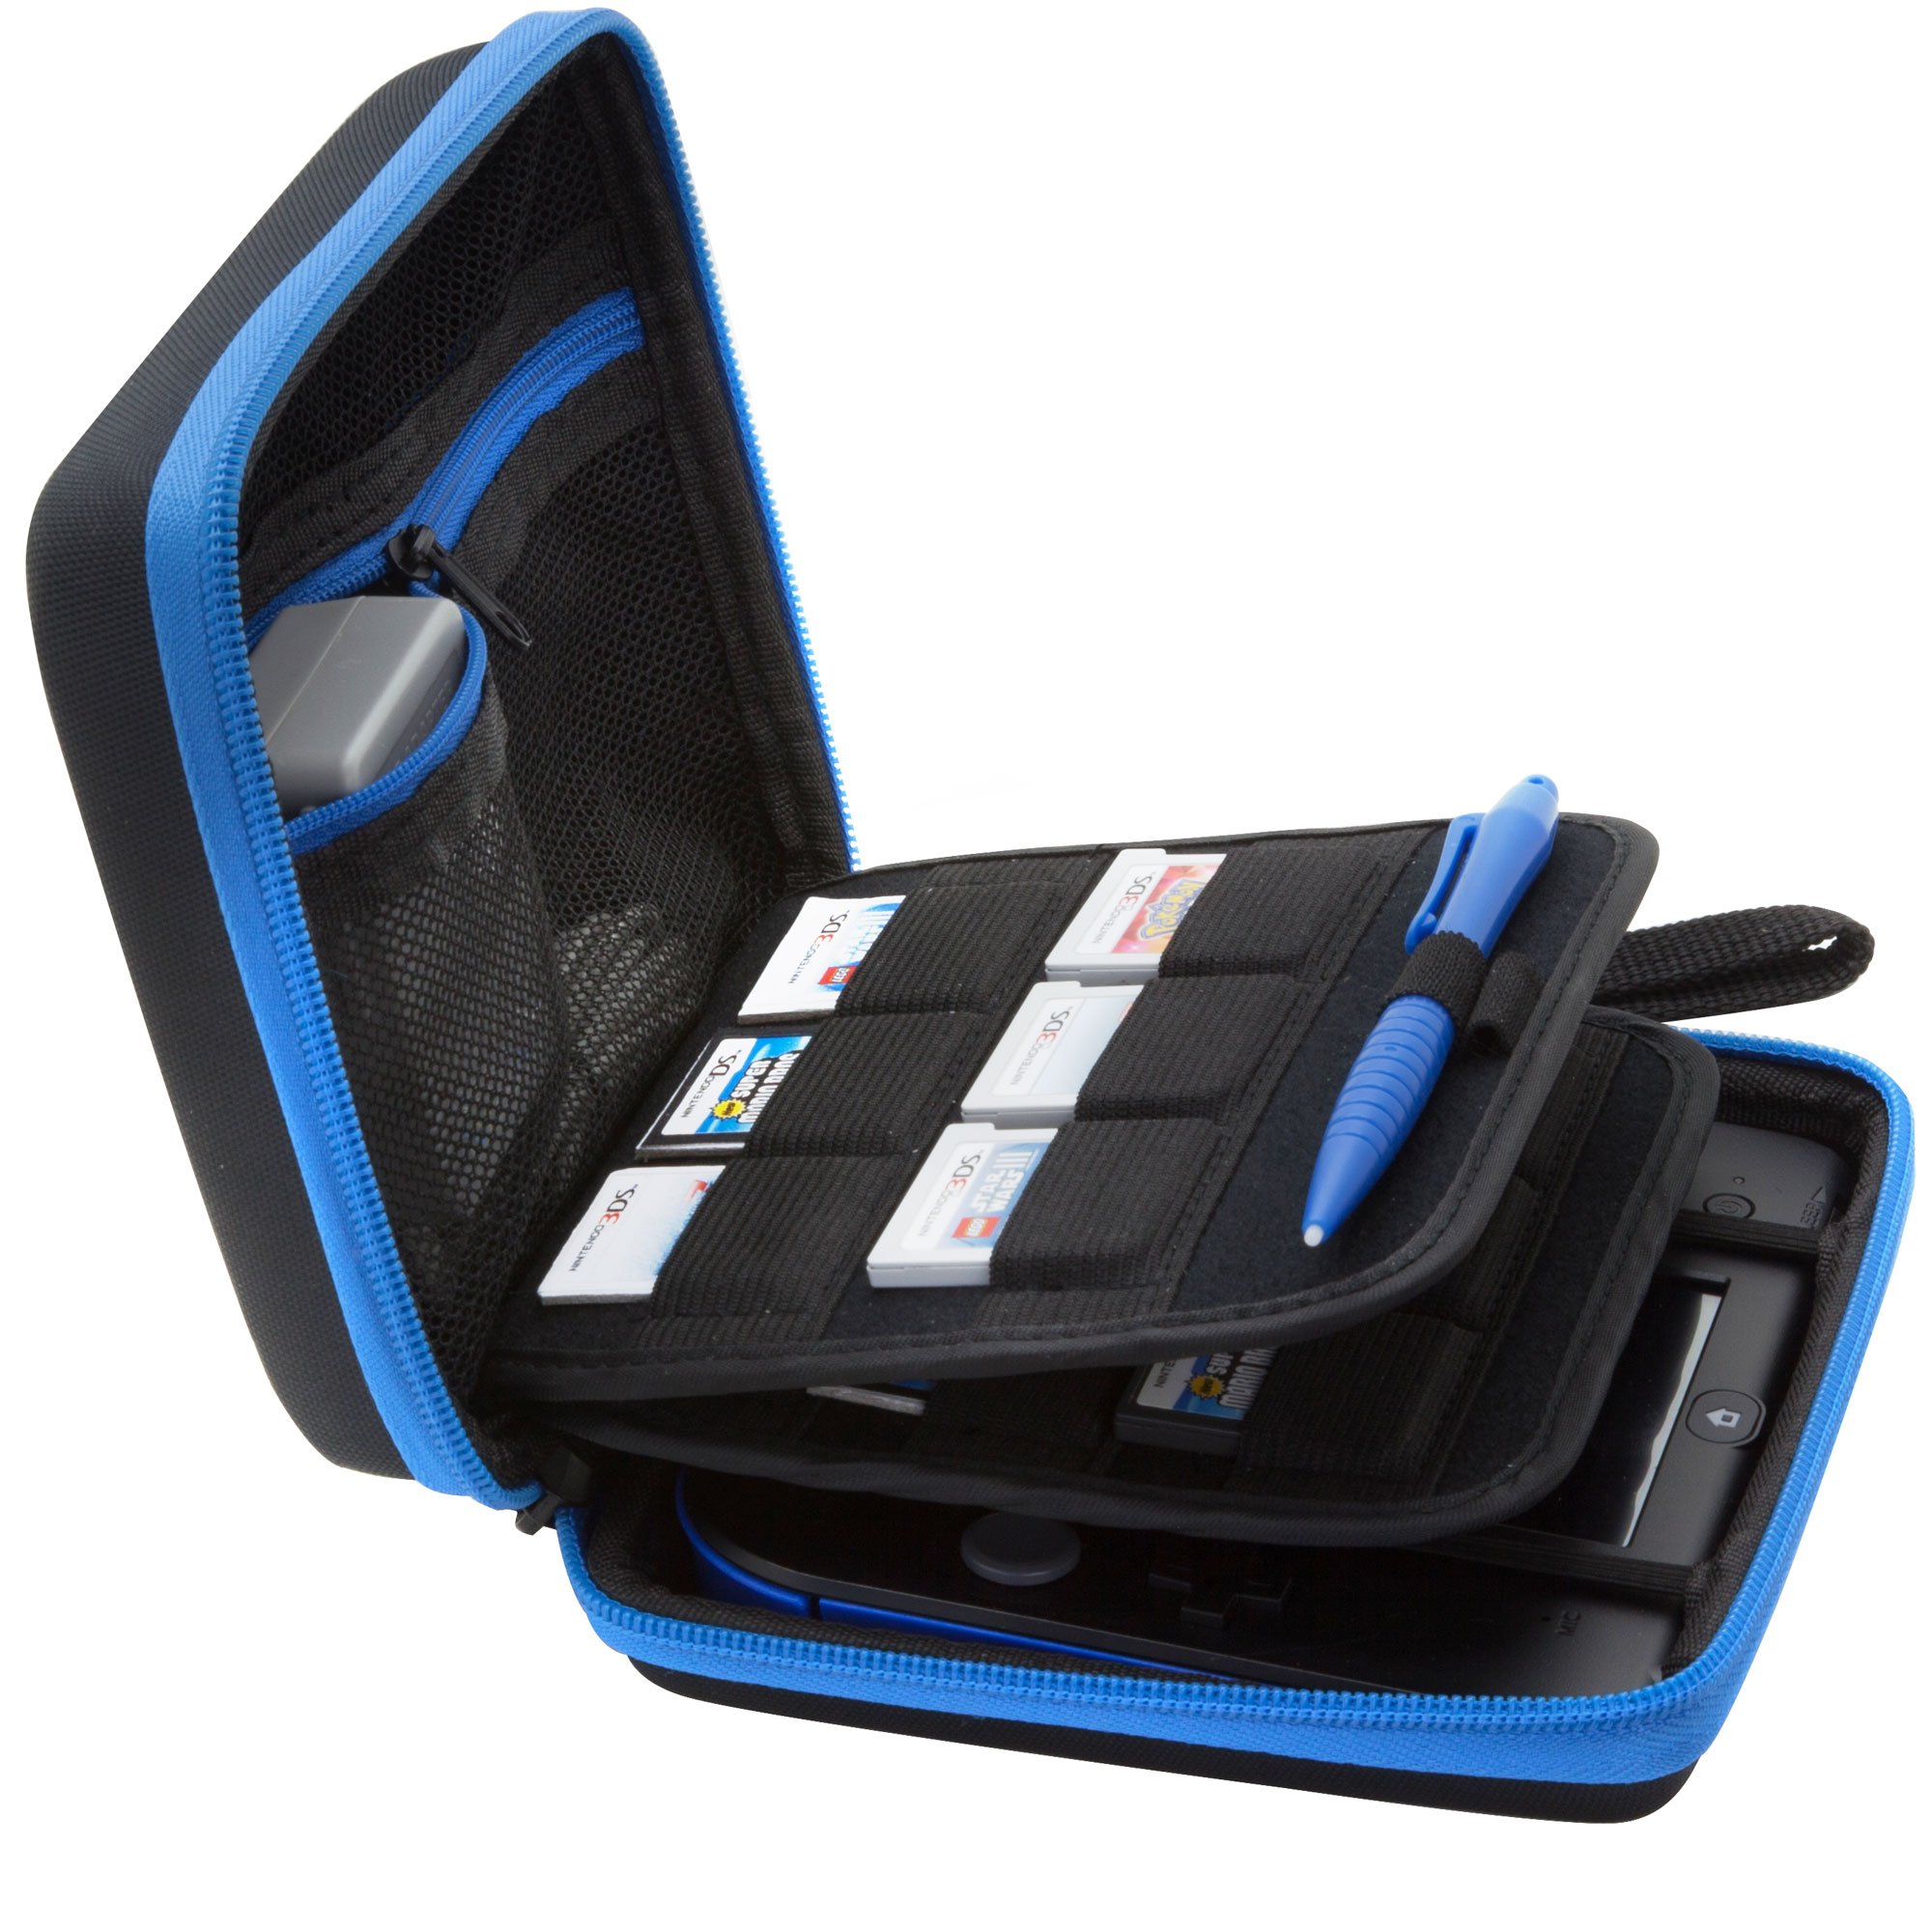 BRENDO Carrying Case for Nintendo 2DS with 24 Game Storage Holders, Fits Charger - Black/Blue